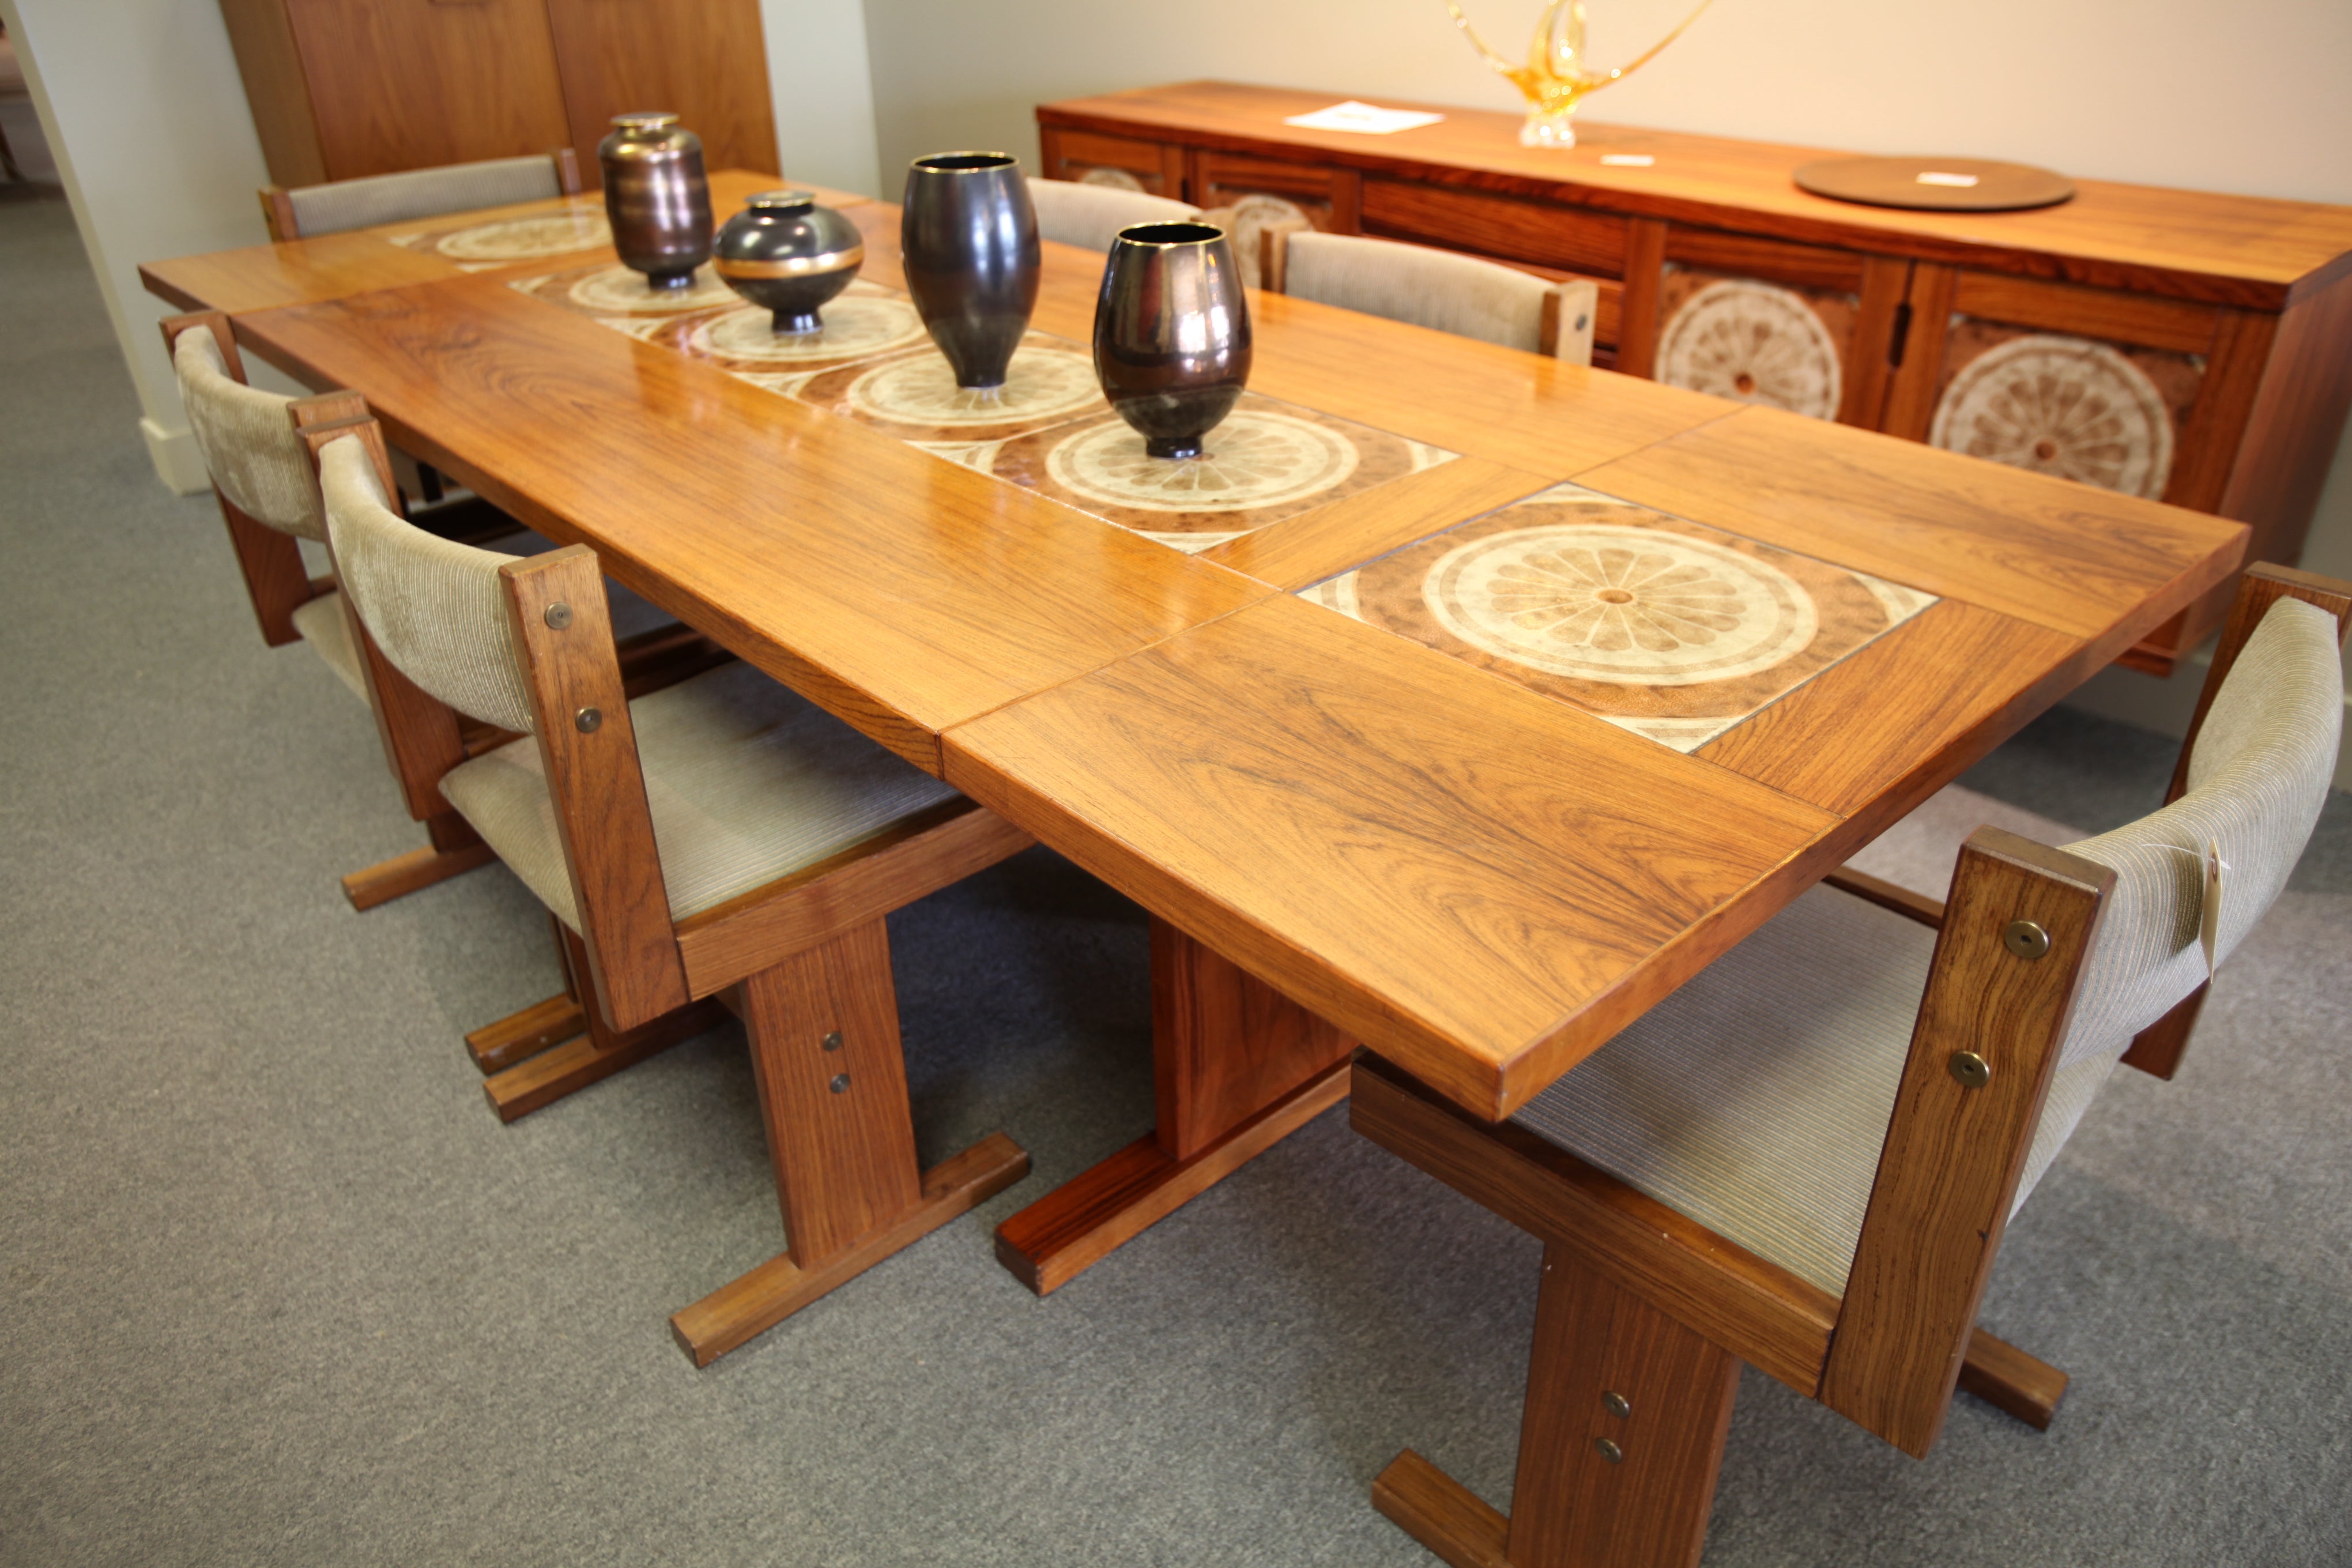 Gangso Mobler Danish Rosewood / Tile Dining Table (96"L x 38"W) or (61"L x 38"W)